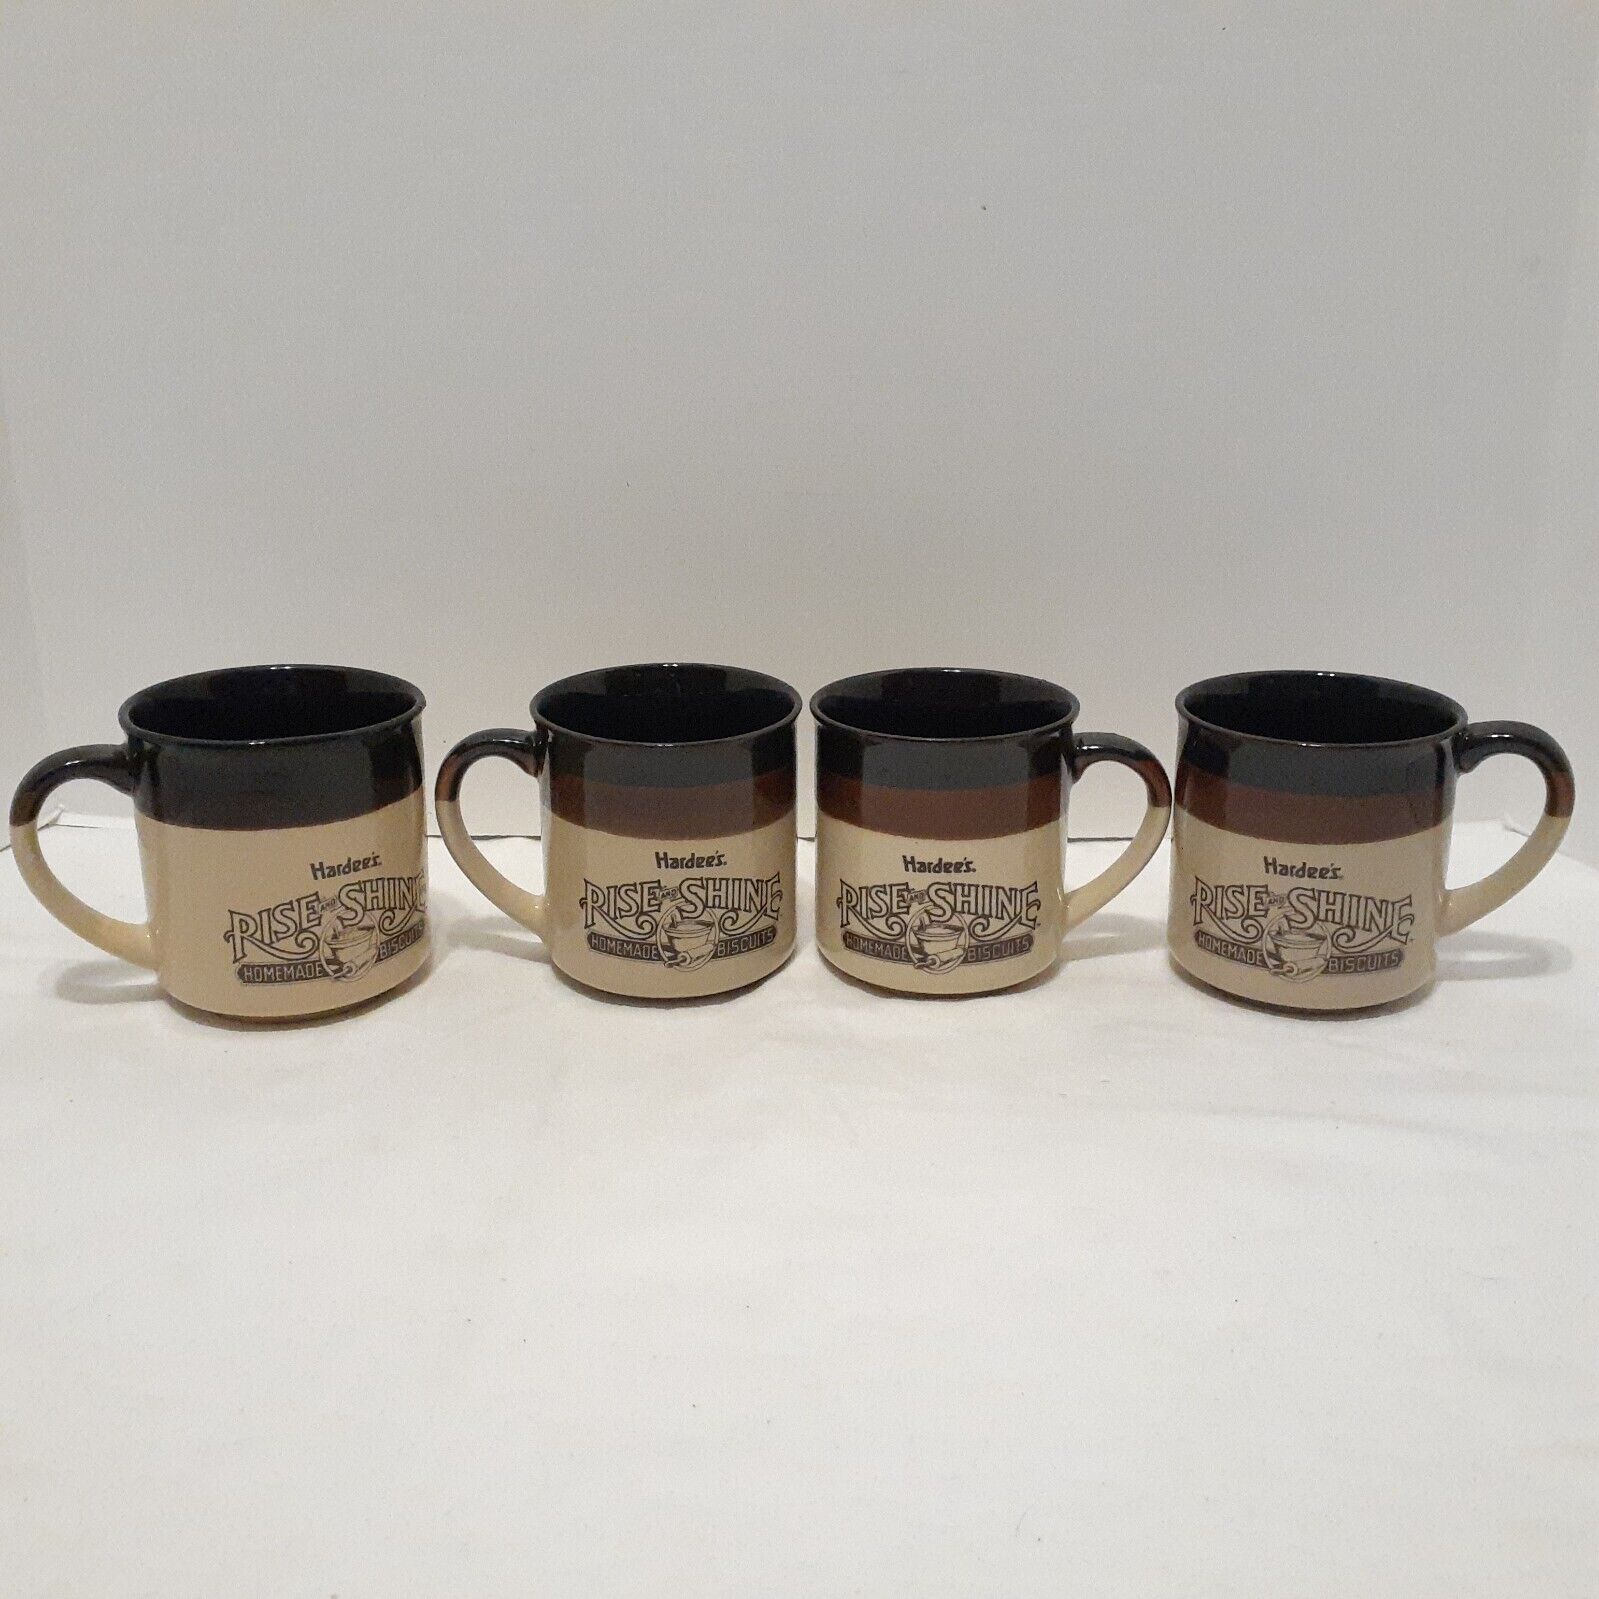 Vintage Set of 4 Hardee's 1989 Rise and Shine Coffee Mugs / Cups